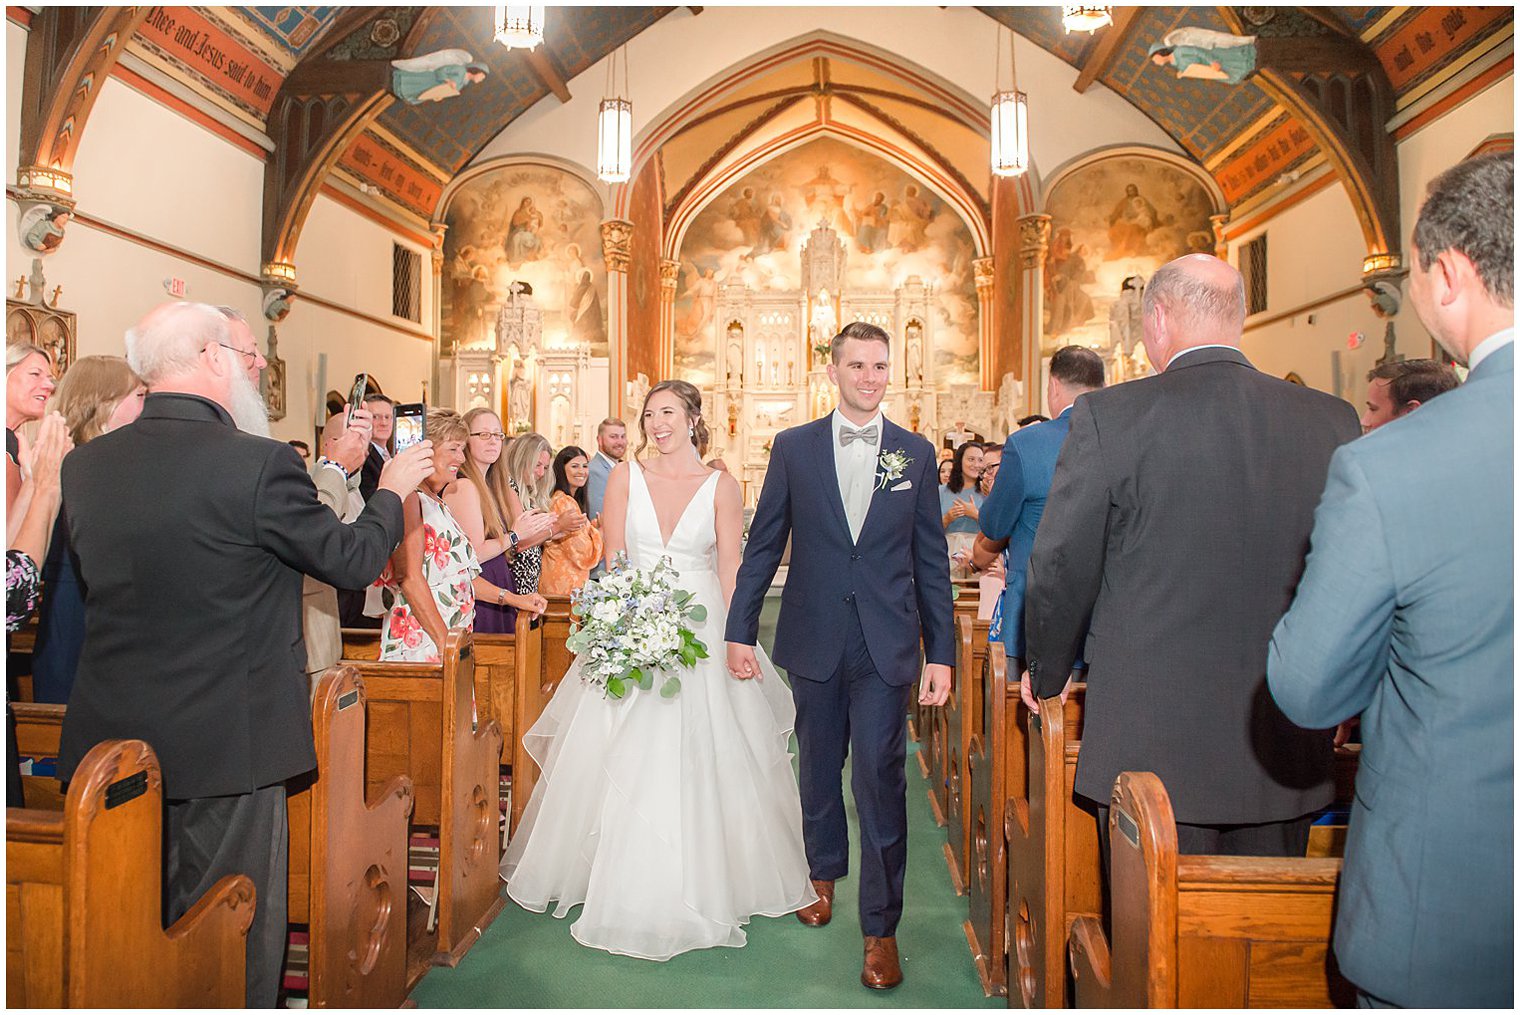 newlyweds walk up aisle during traditional church wedding in NJ